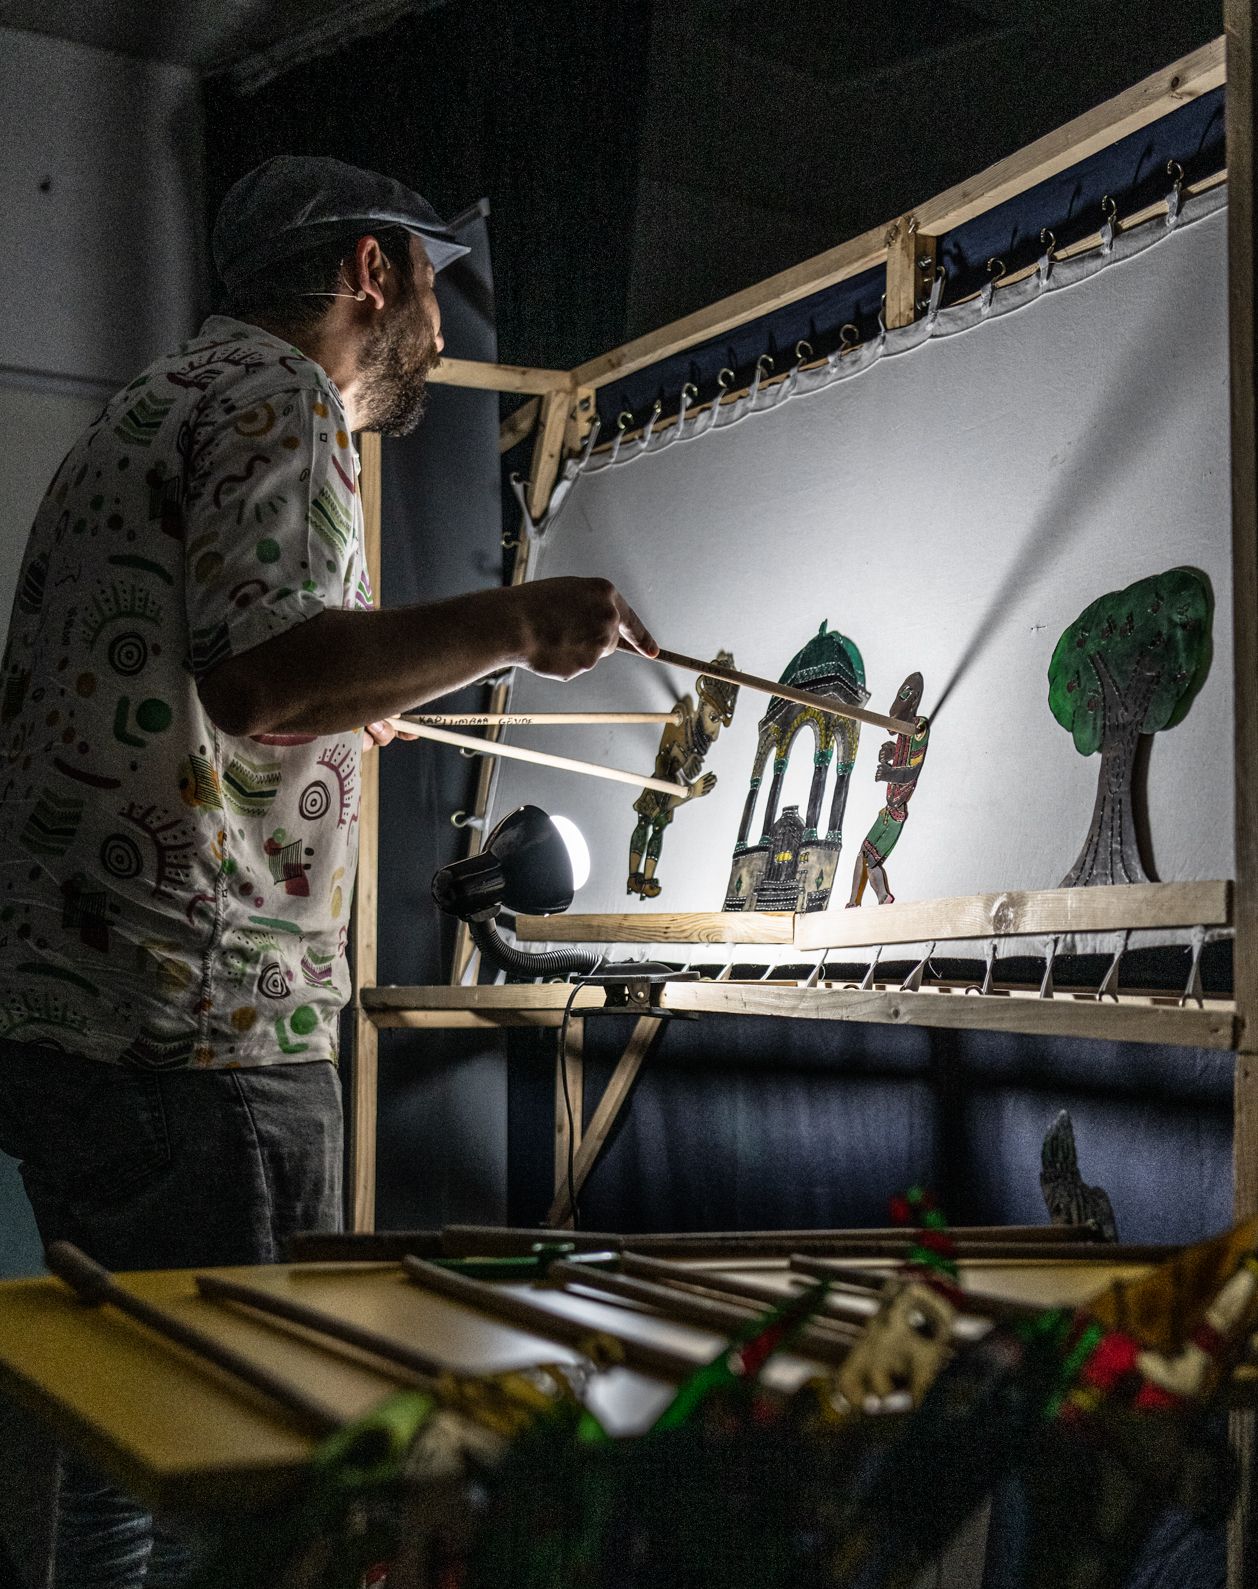 A man performs traditional Turkish shadow puppetry behind a screen, with a puppet on a wooden stick in each hand.